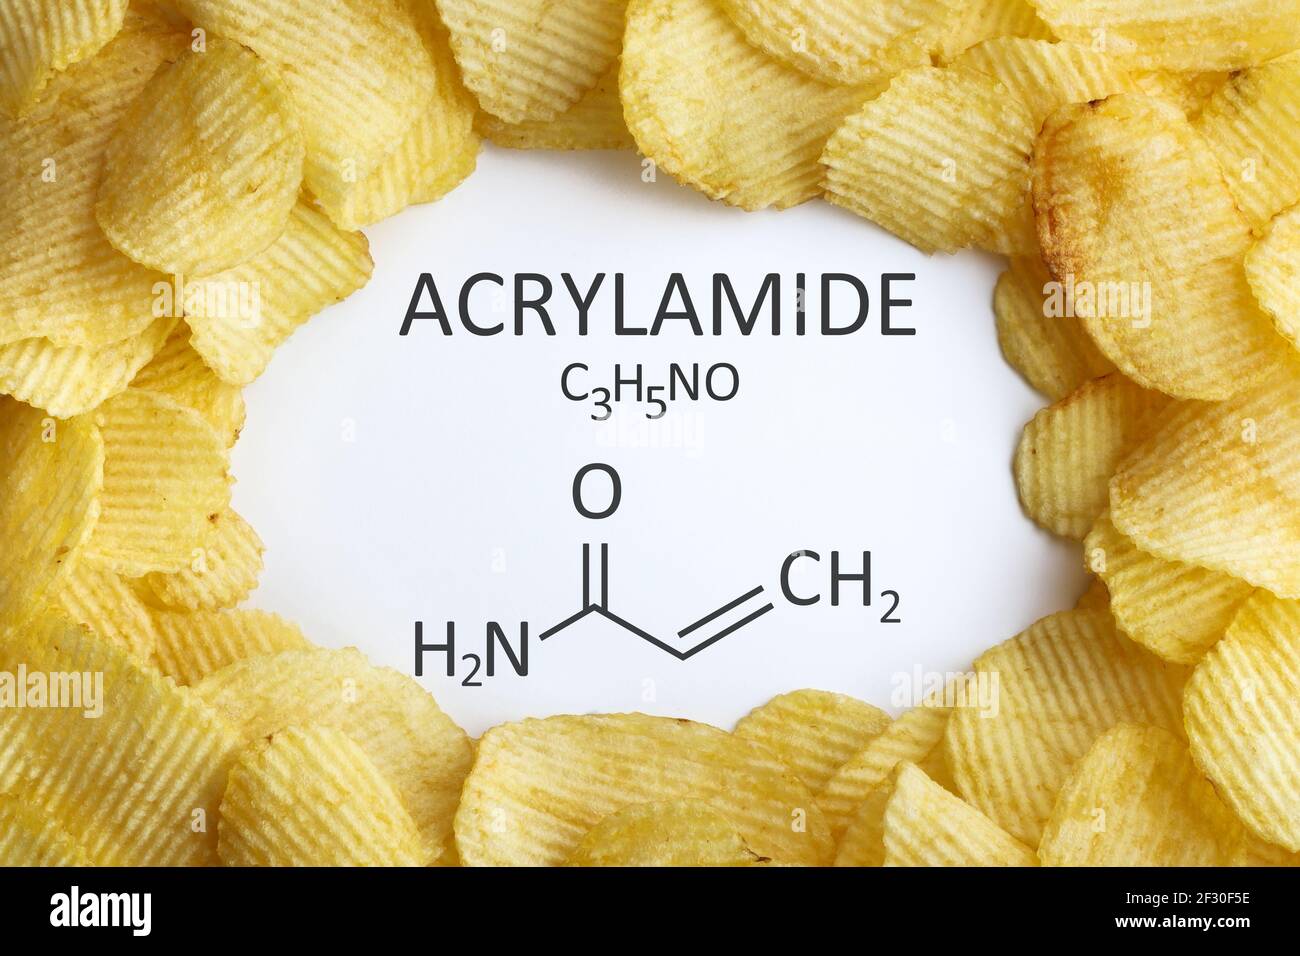 Acrylamide in food. Chips snack food and chemical formula of acrylamide Stock Photo